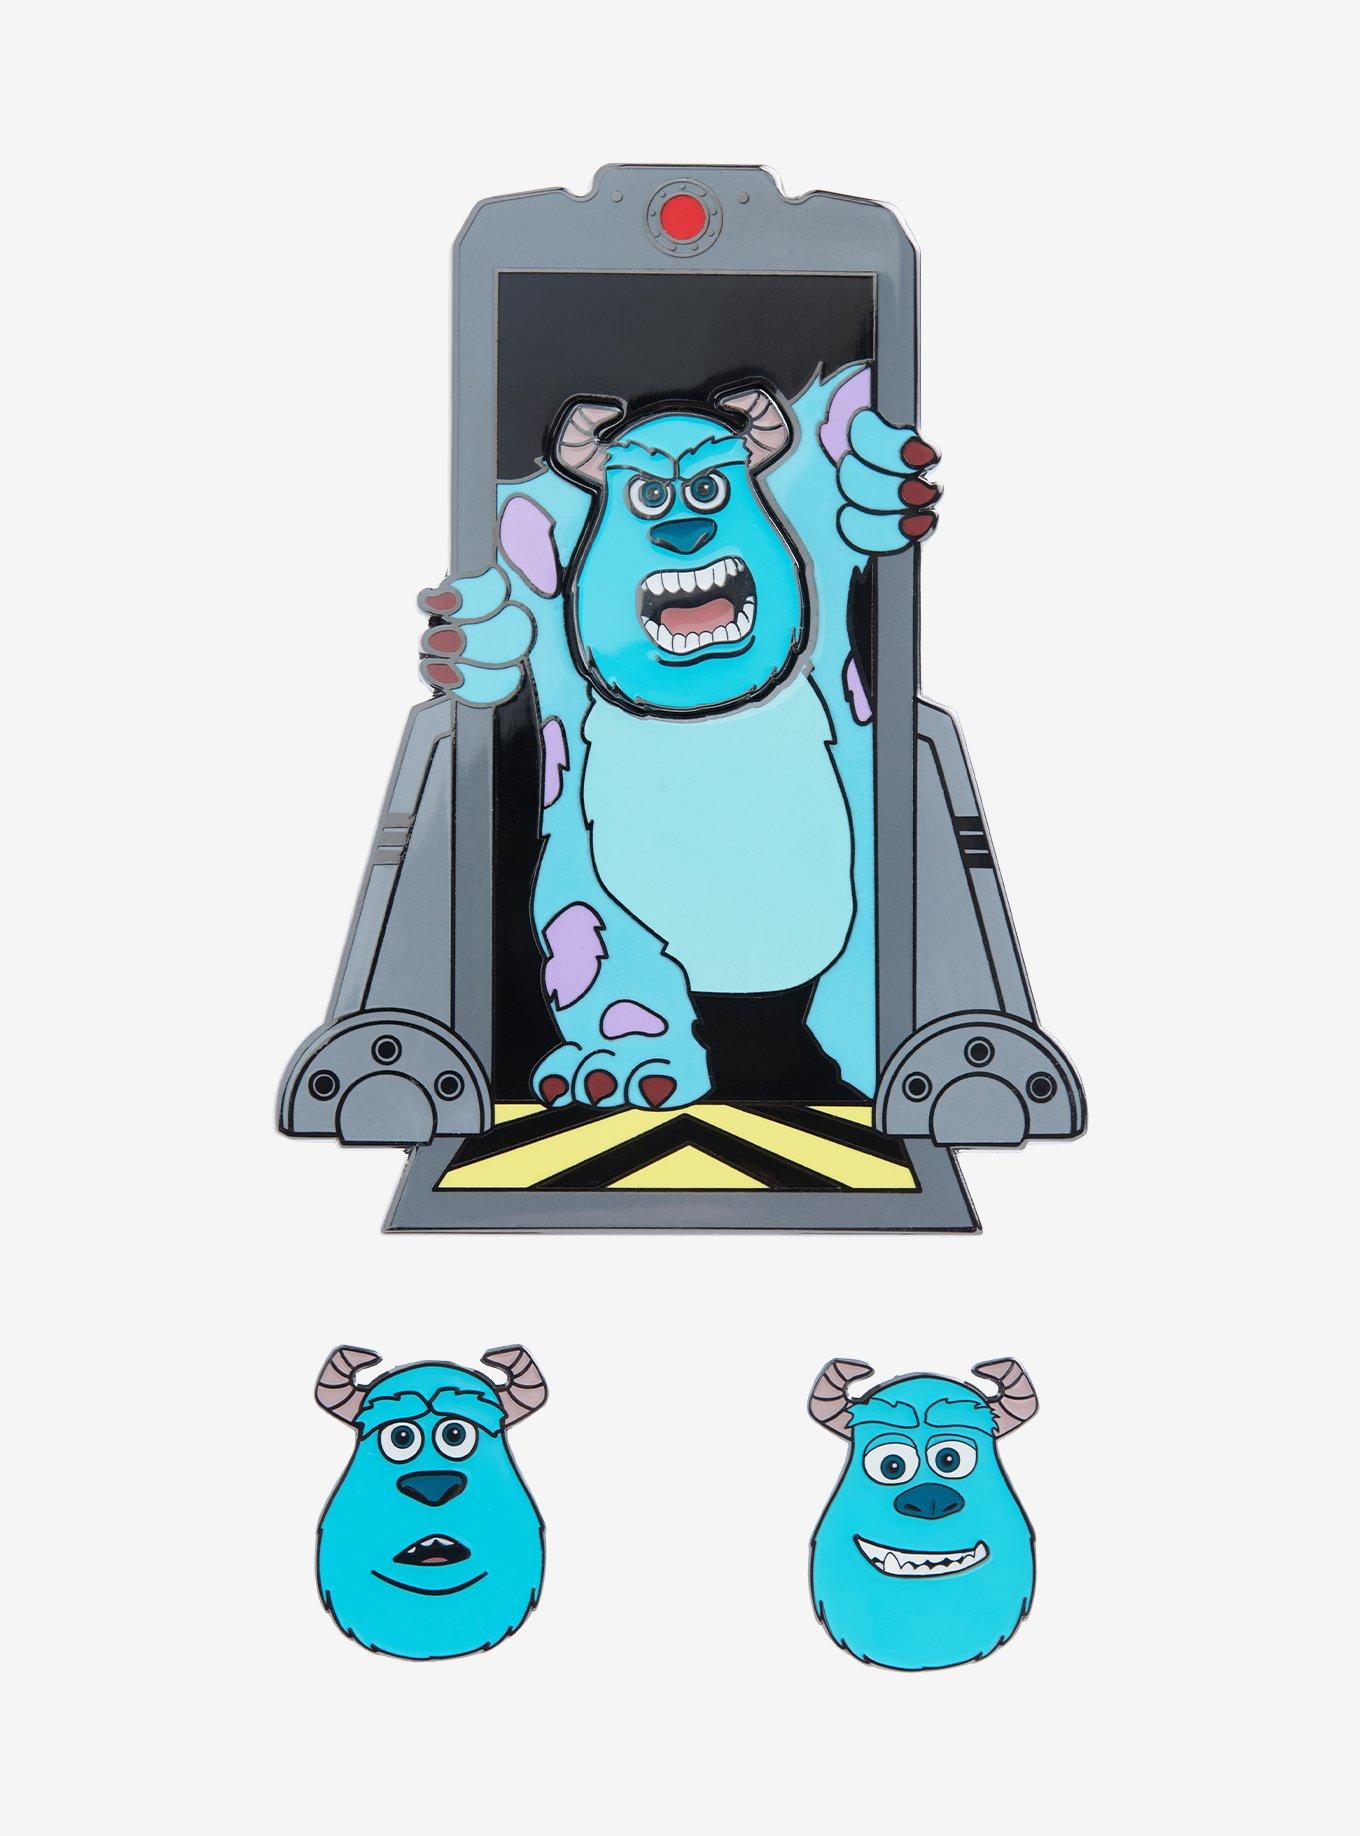 Disney Monsters Inc Sully With A Backpack PVC Figure On A Black Round Base,  3 1/8 Inches Tall